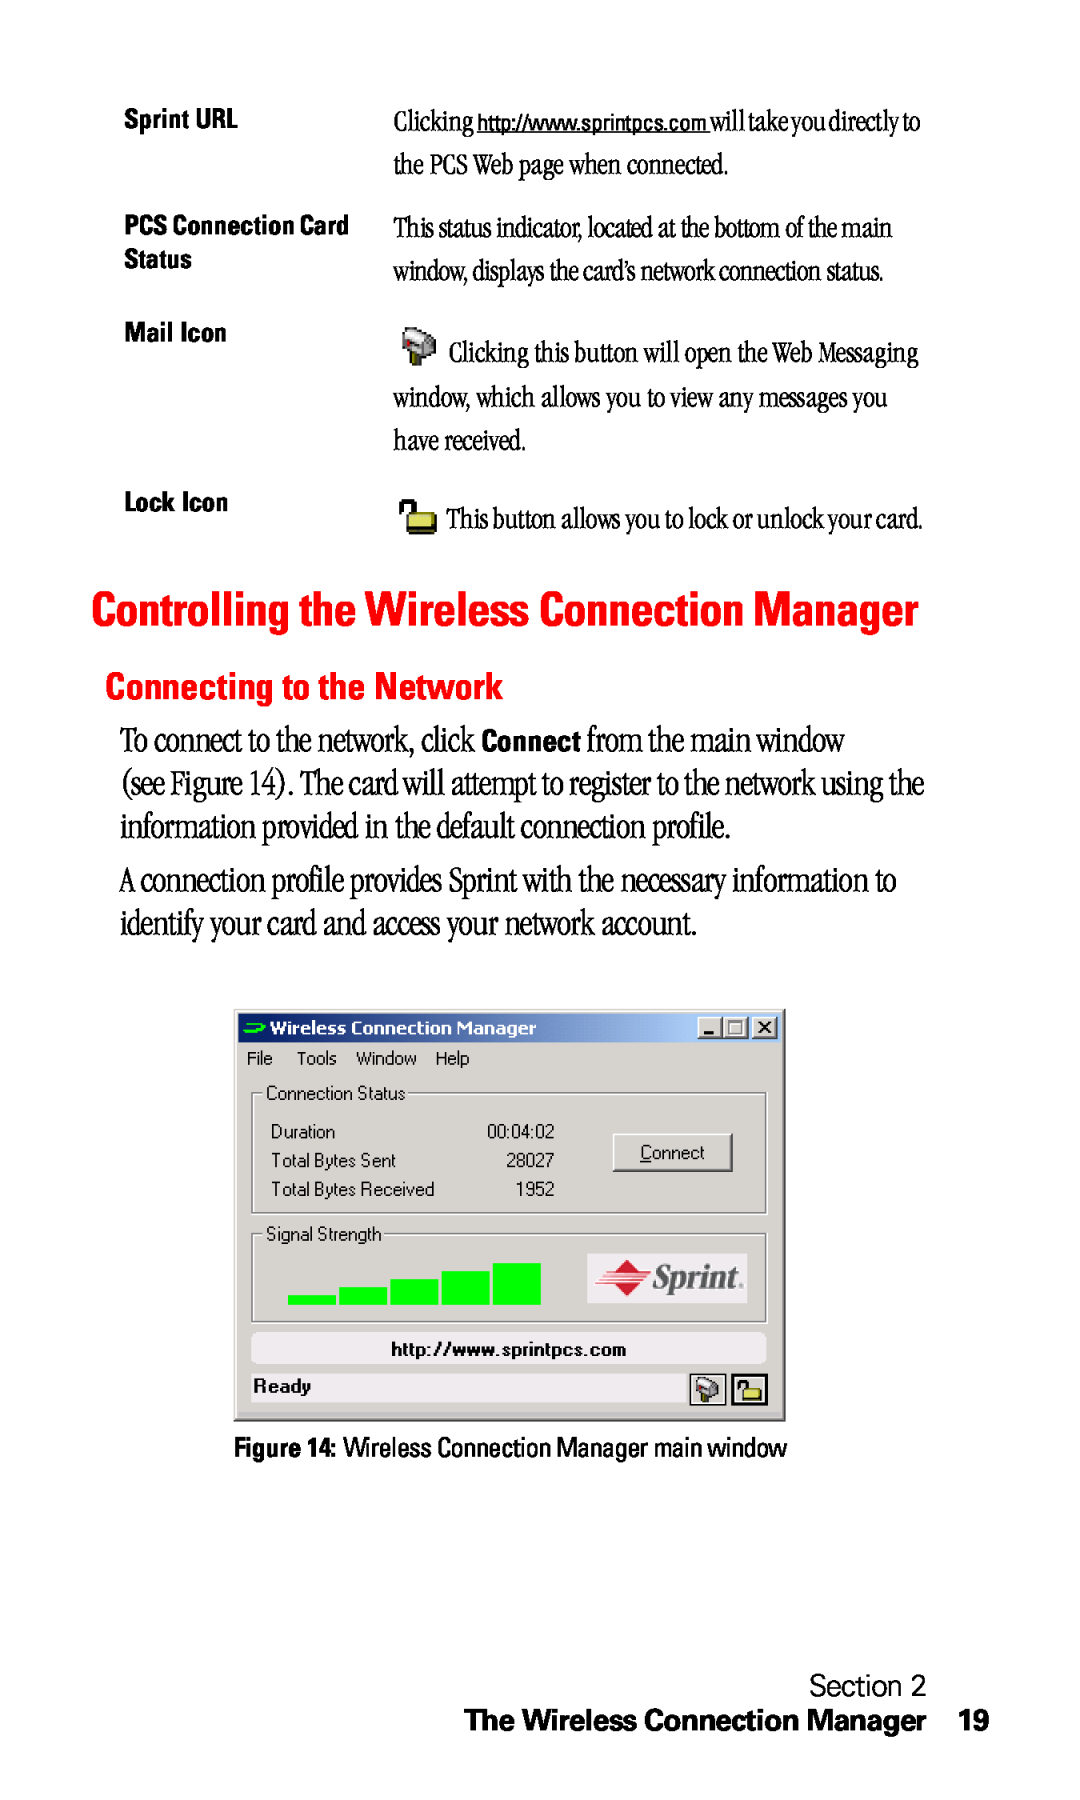 Sprint Nextel C201 Controlling the Wireless Connection Manager, Connecting to the Network, The Wireless Connection Manager 